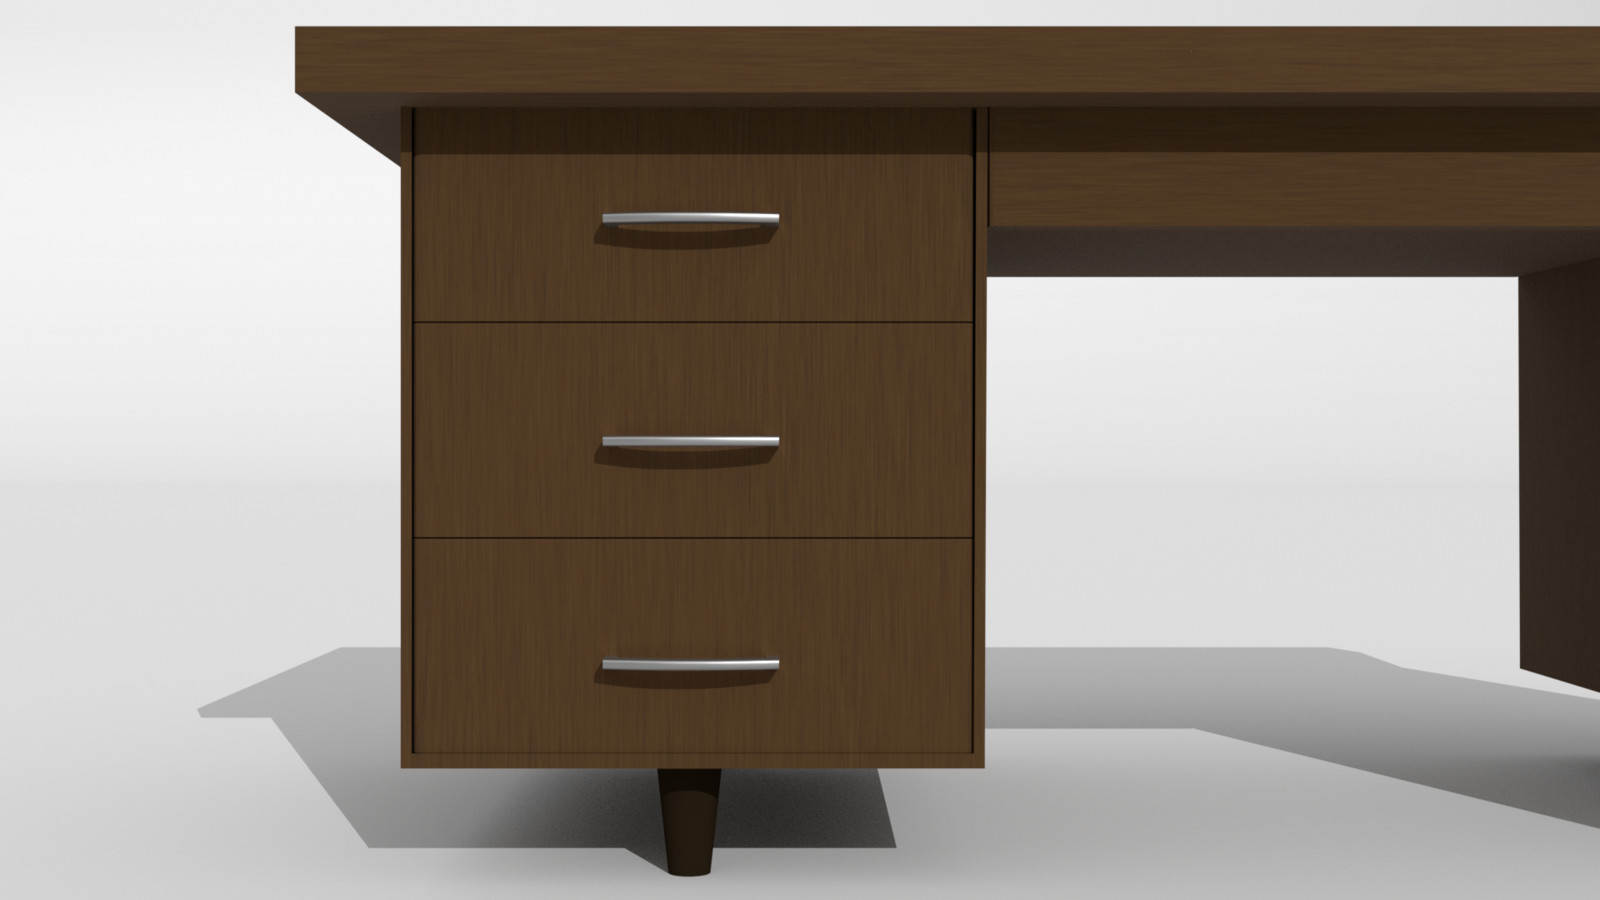 View of the desk drawers.